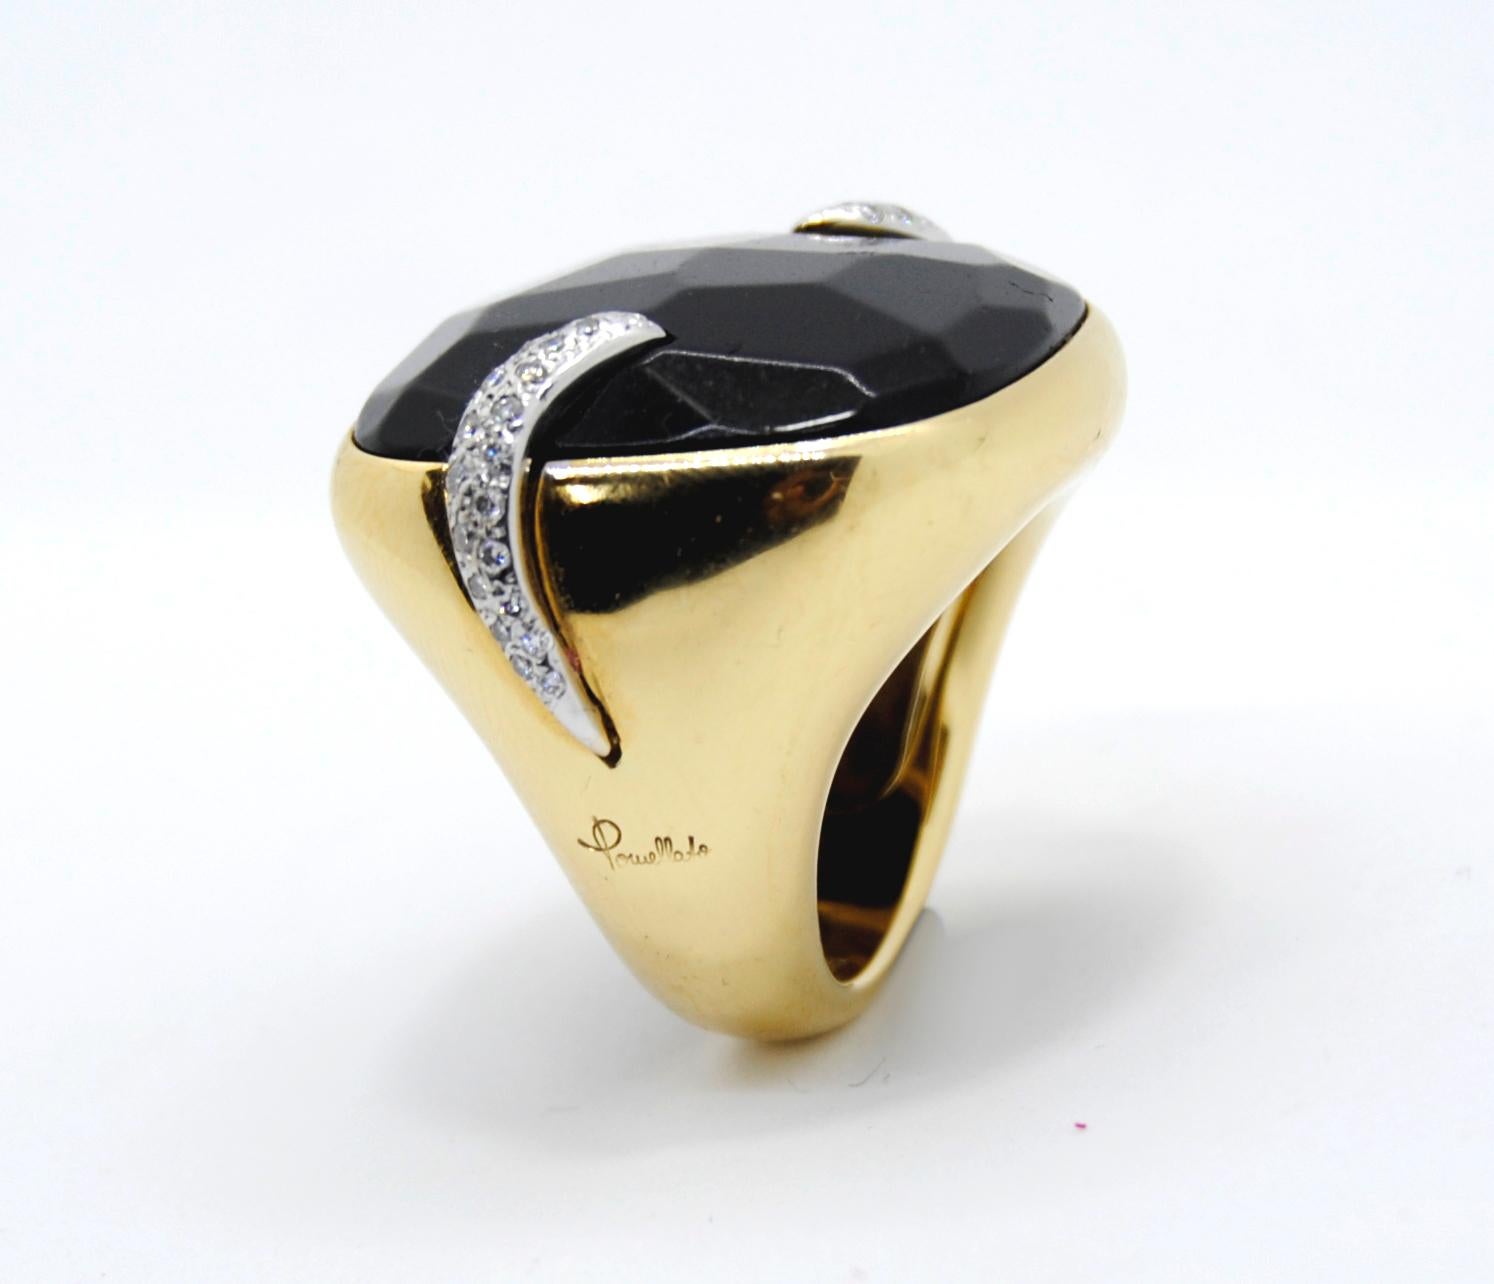 Our Shop carries International luxury brands and sometimes buys rests of Jewelry stocks at great deals and opportunities. 
The Victoria Black Jet Pomellato ring Retail Price is around 10.000€.
Size Europe 55 US 7
Weight 

Synonymous with creativity